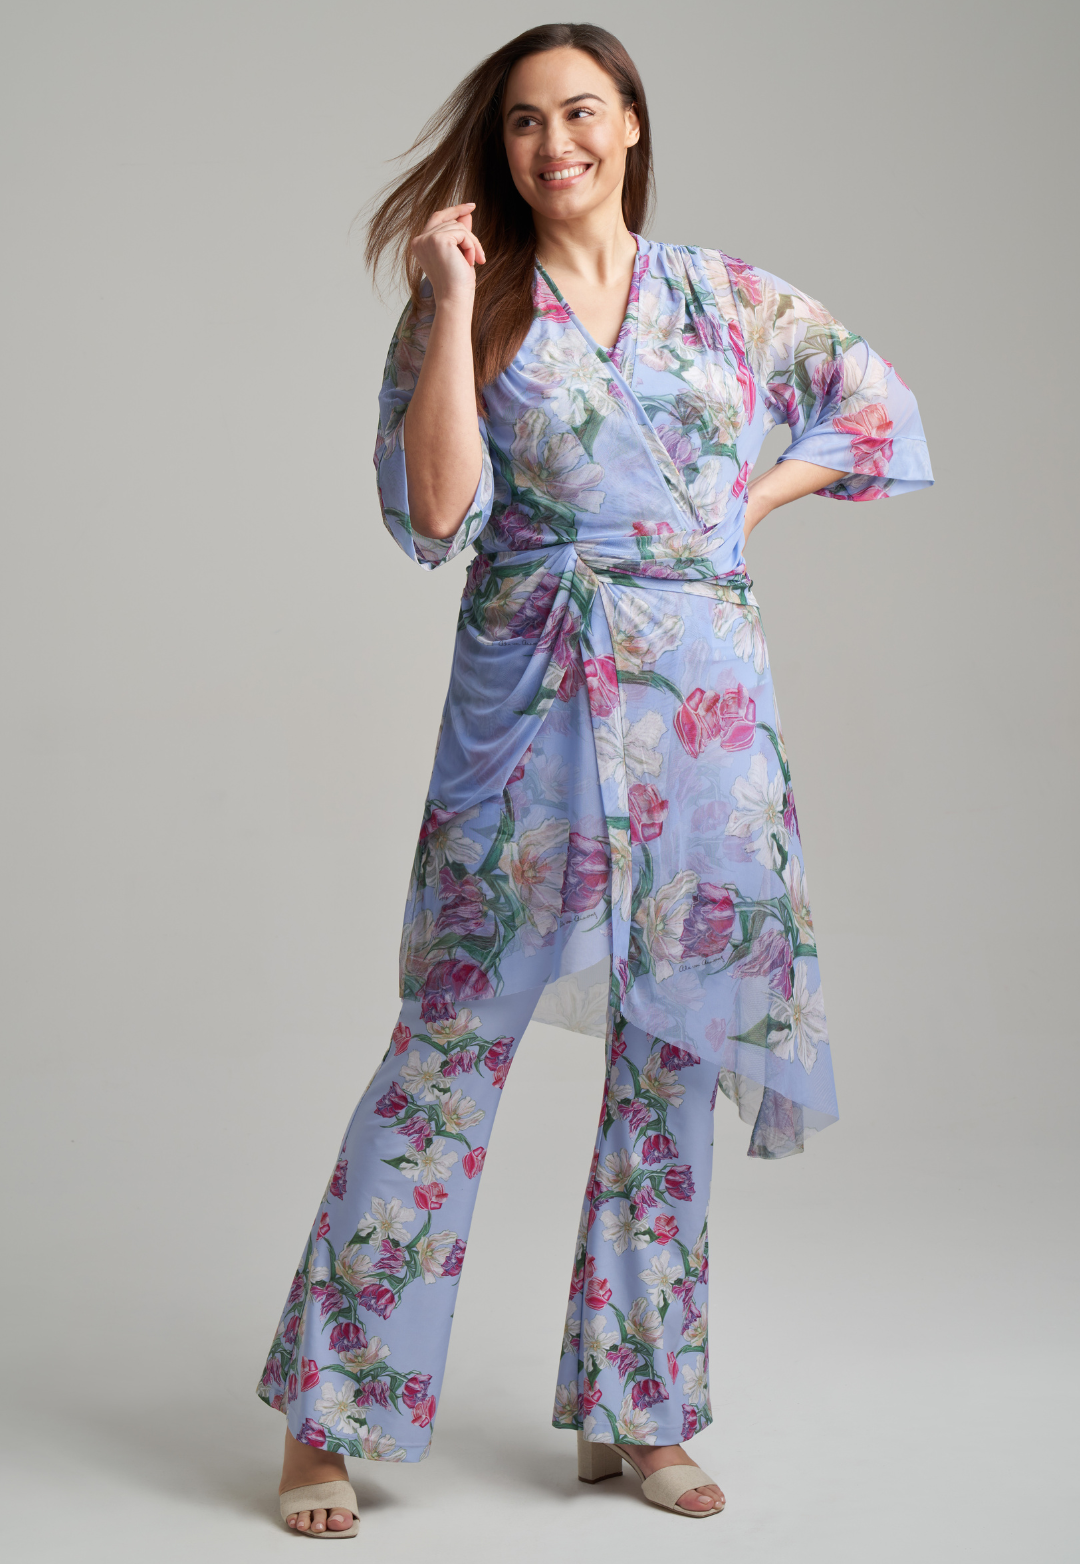 woman wearing stretch knit tank top and stretch knit pants in tulip print with mesh tulip printed kimono on top by Ala von Auersperg for spring summer 2021